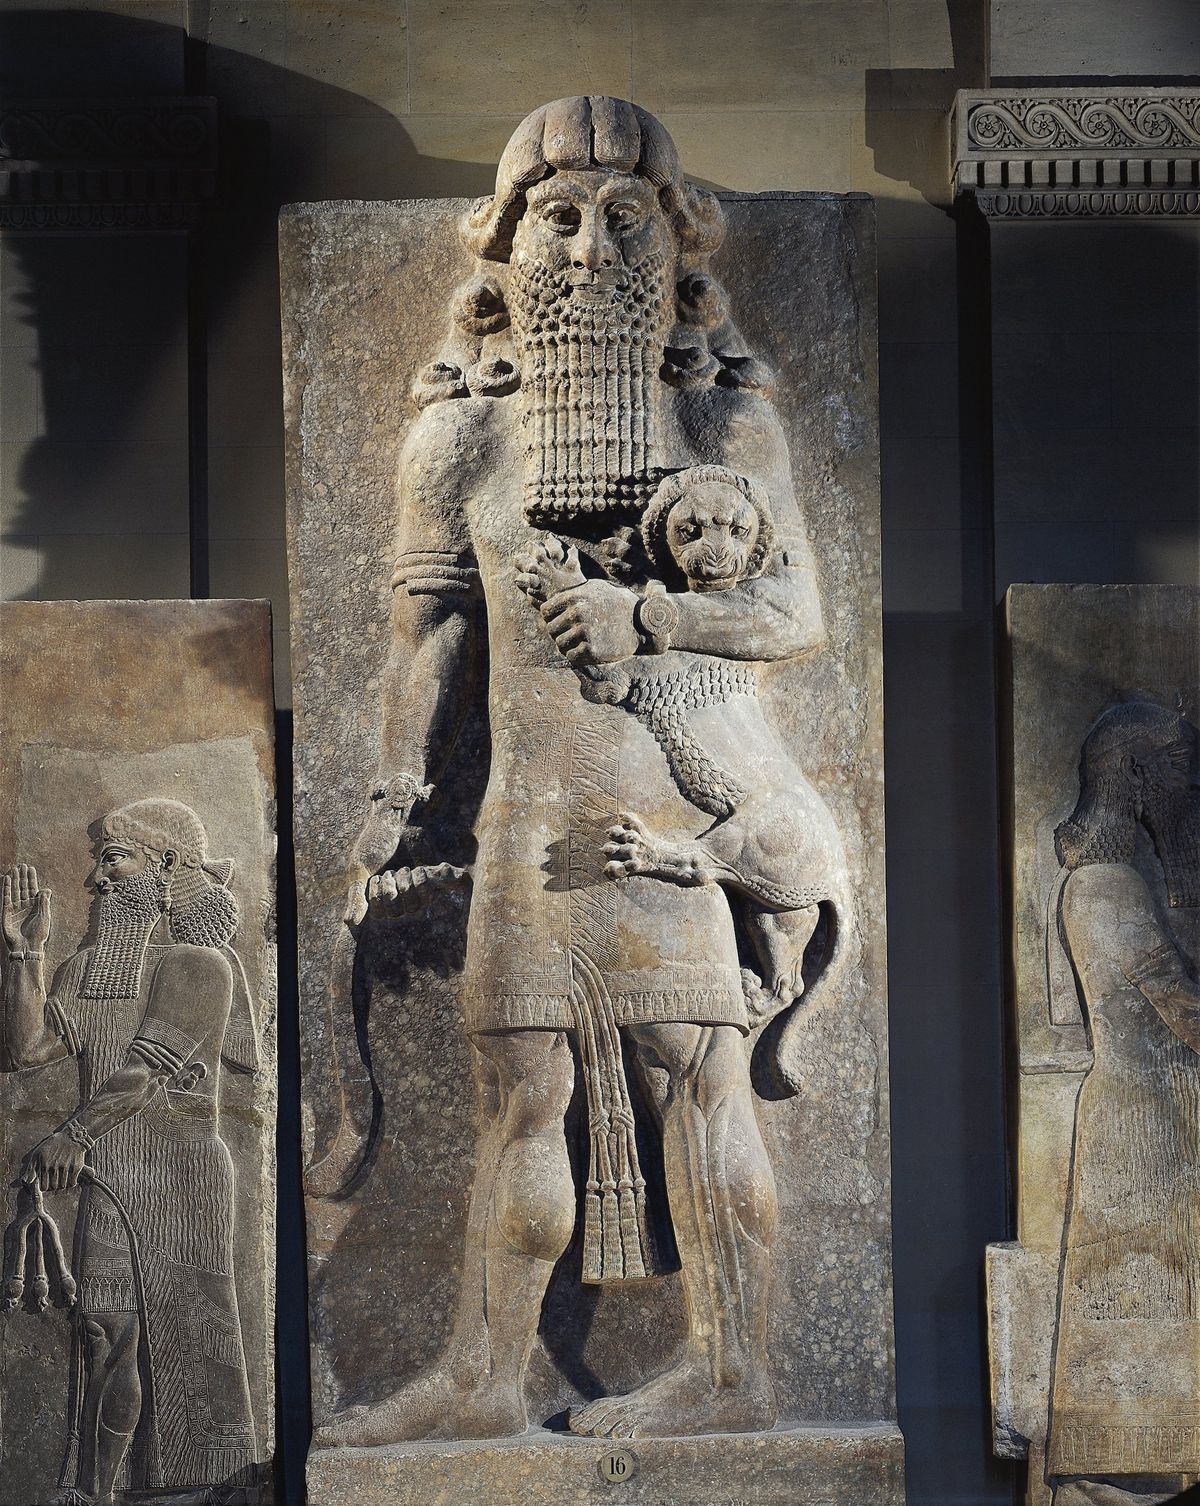 unspecified   circa 1991  assyrian civilization, 8th century bc chalky alabaster statue of gilgamesh, king of uruk from khorsabad, iraq  photo by dea  g dagli ortide agostini via getty images